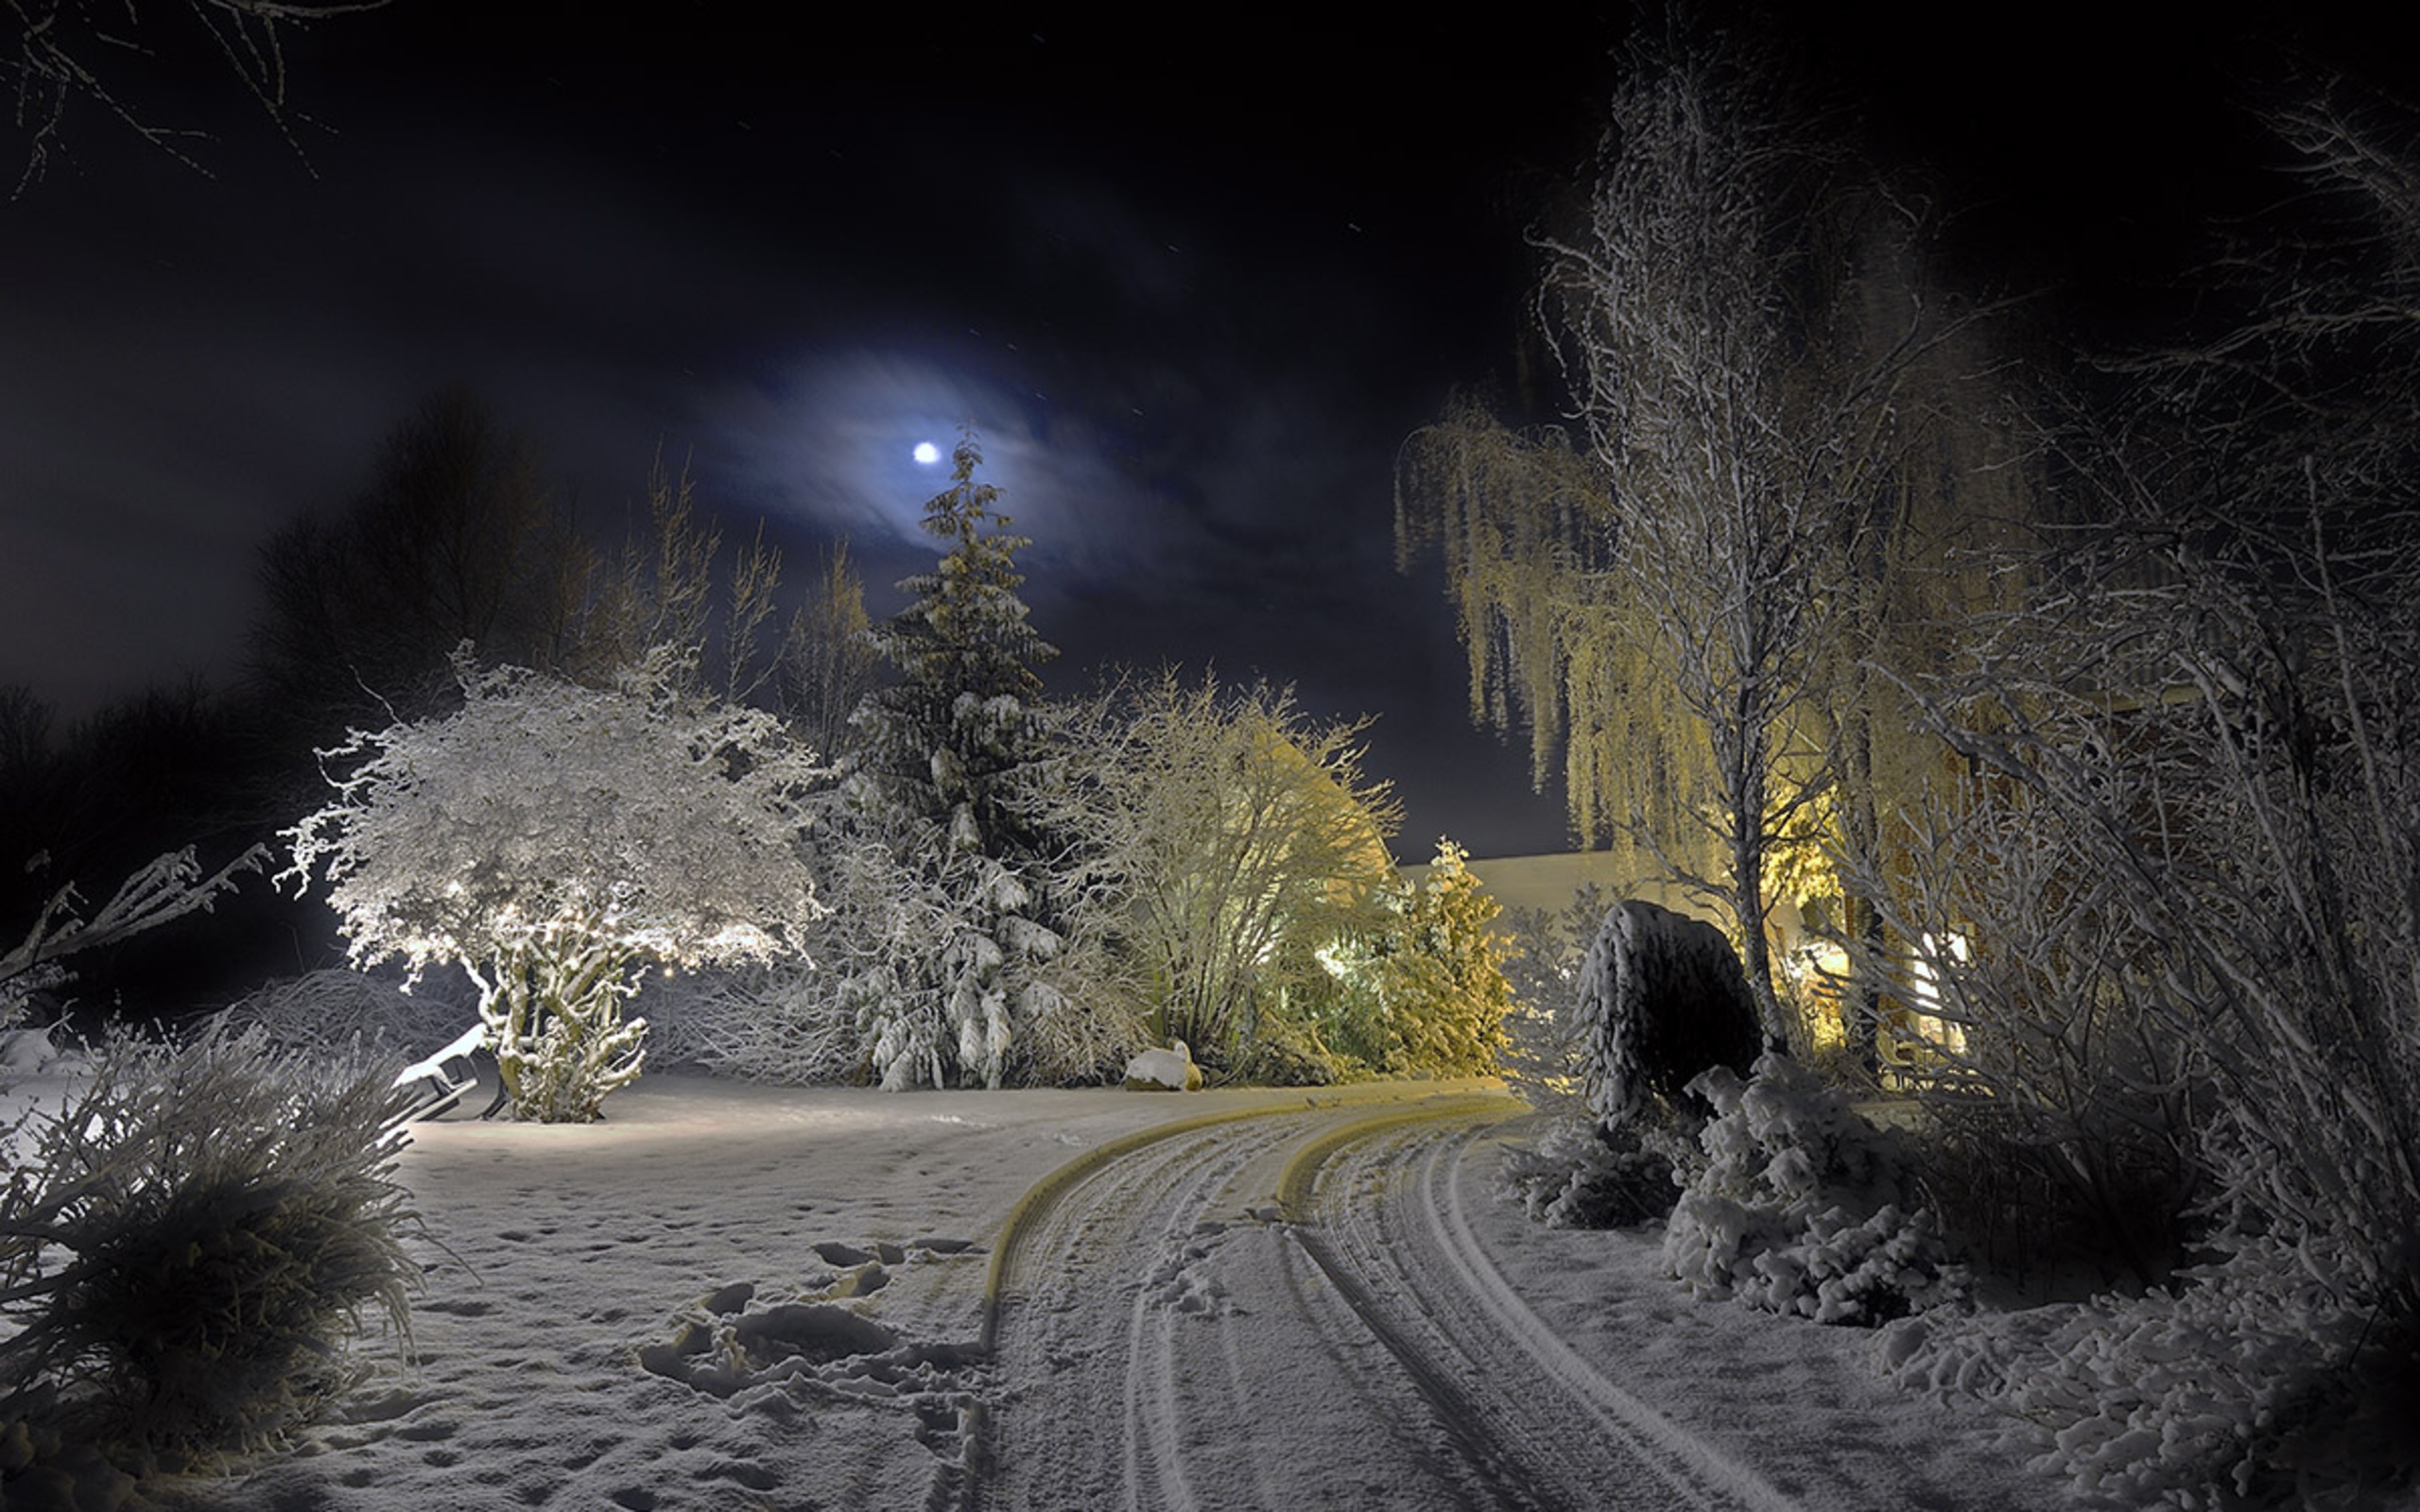 Wallpaper Snow Covered House Near Trees During Night Time Background   Download Free Image